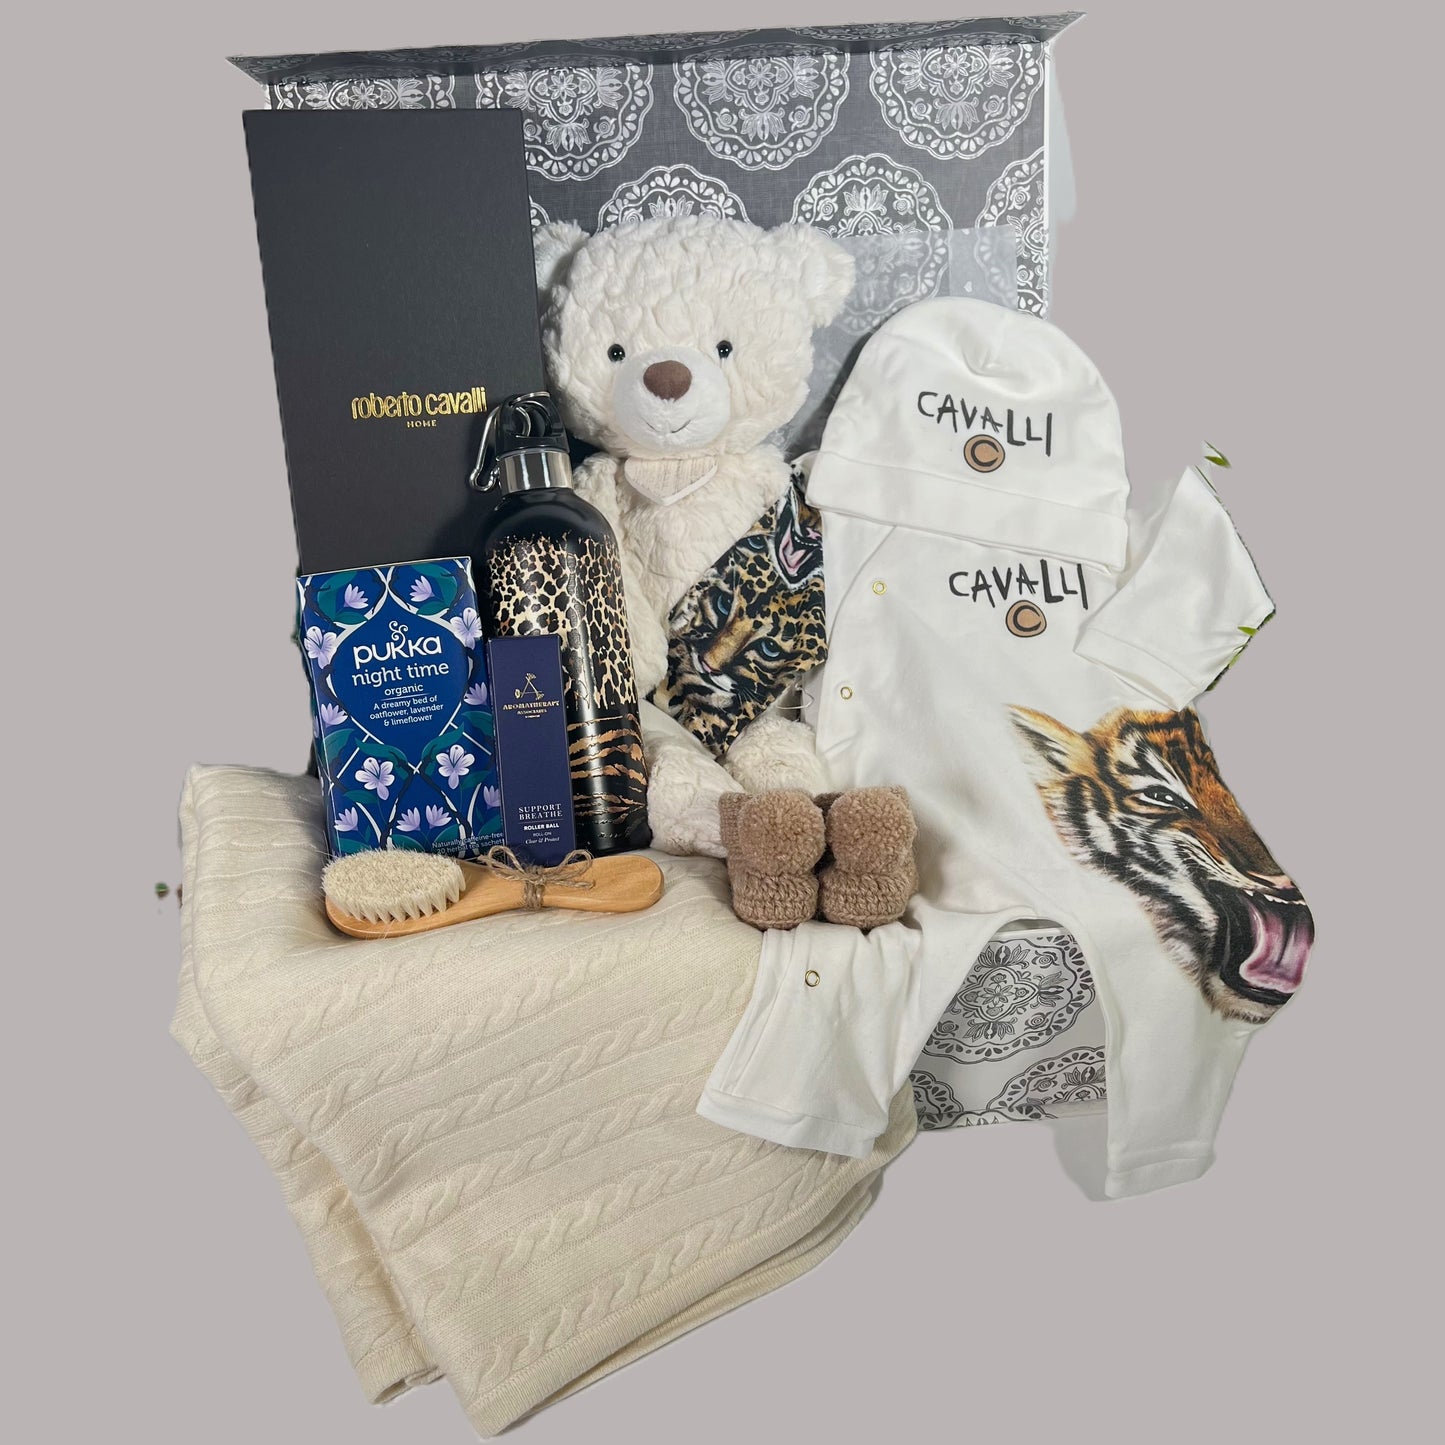 Luxury new parents gift in a baby keepsake box, a Roberto cavelli Tiger baby romper  ans matching baby hat, a Roberto Cavelli wtaer bottle, a wooden baby hair brush and comb st, a cream cashmere baby blanket, a pair of merino wool baby booties.